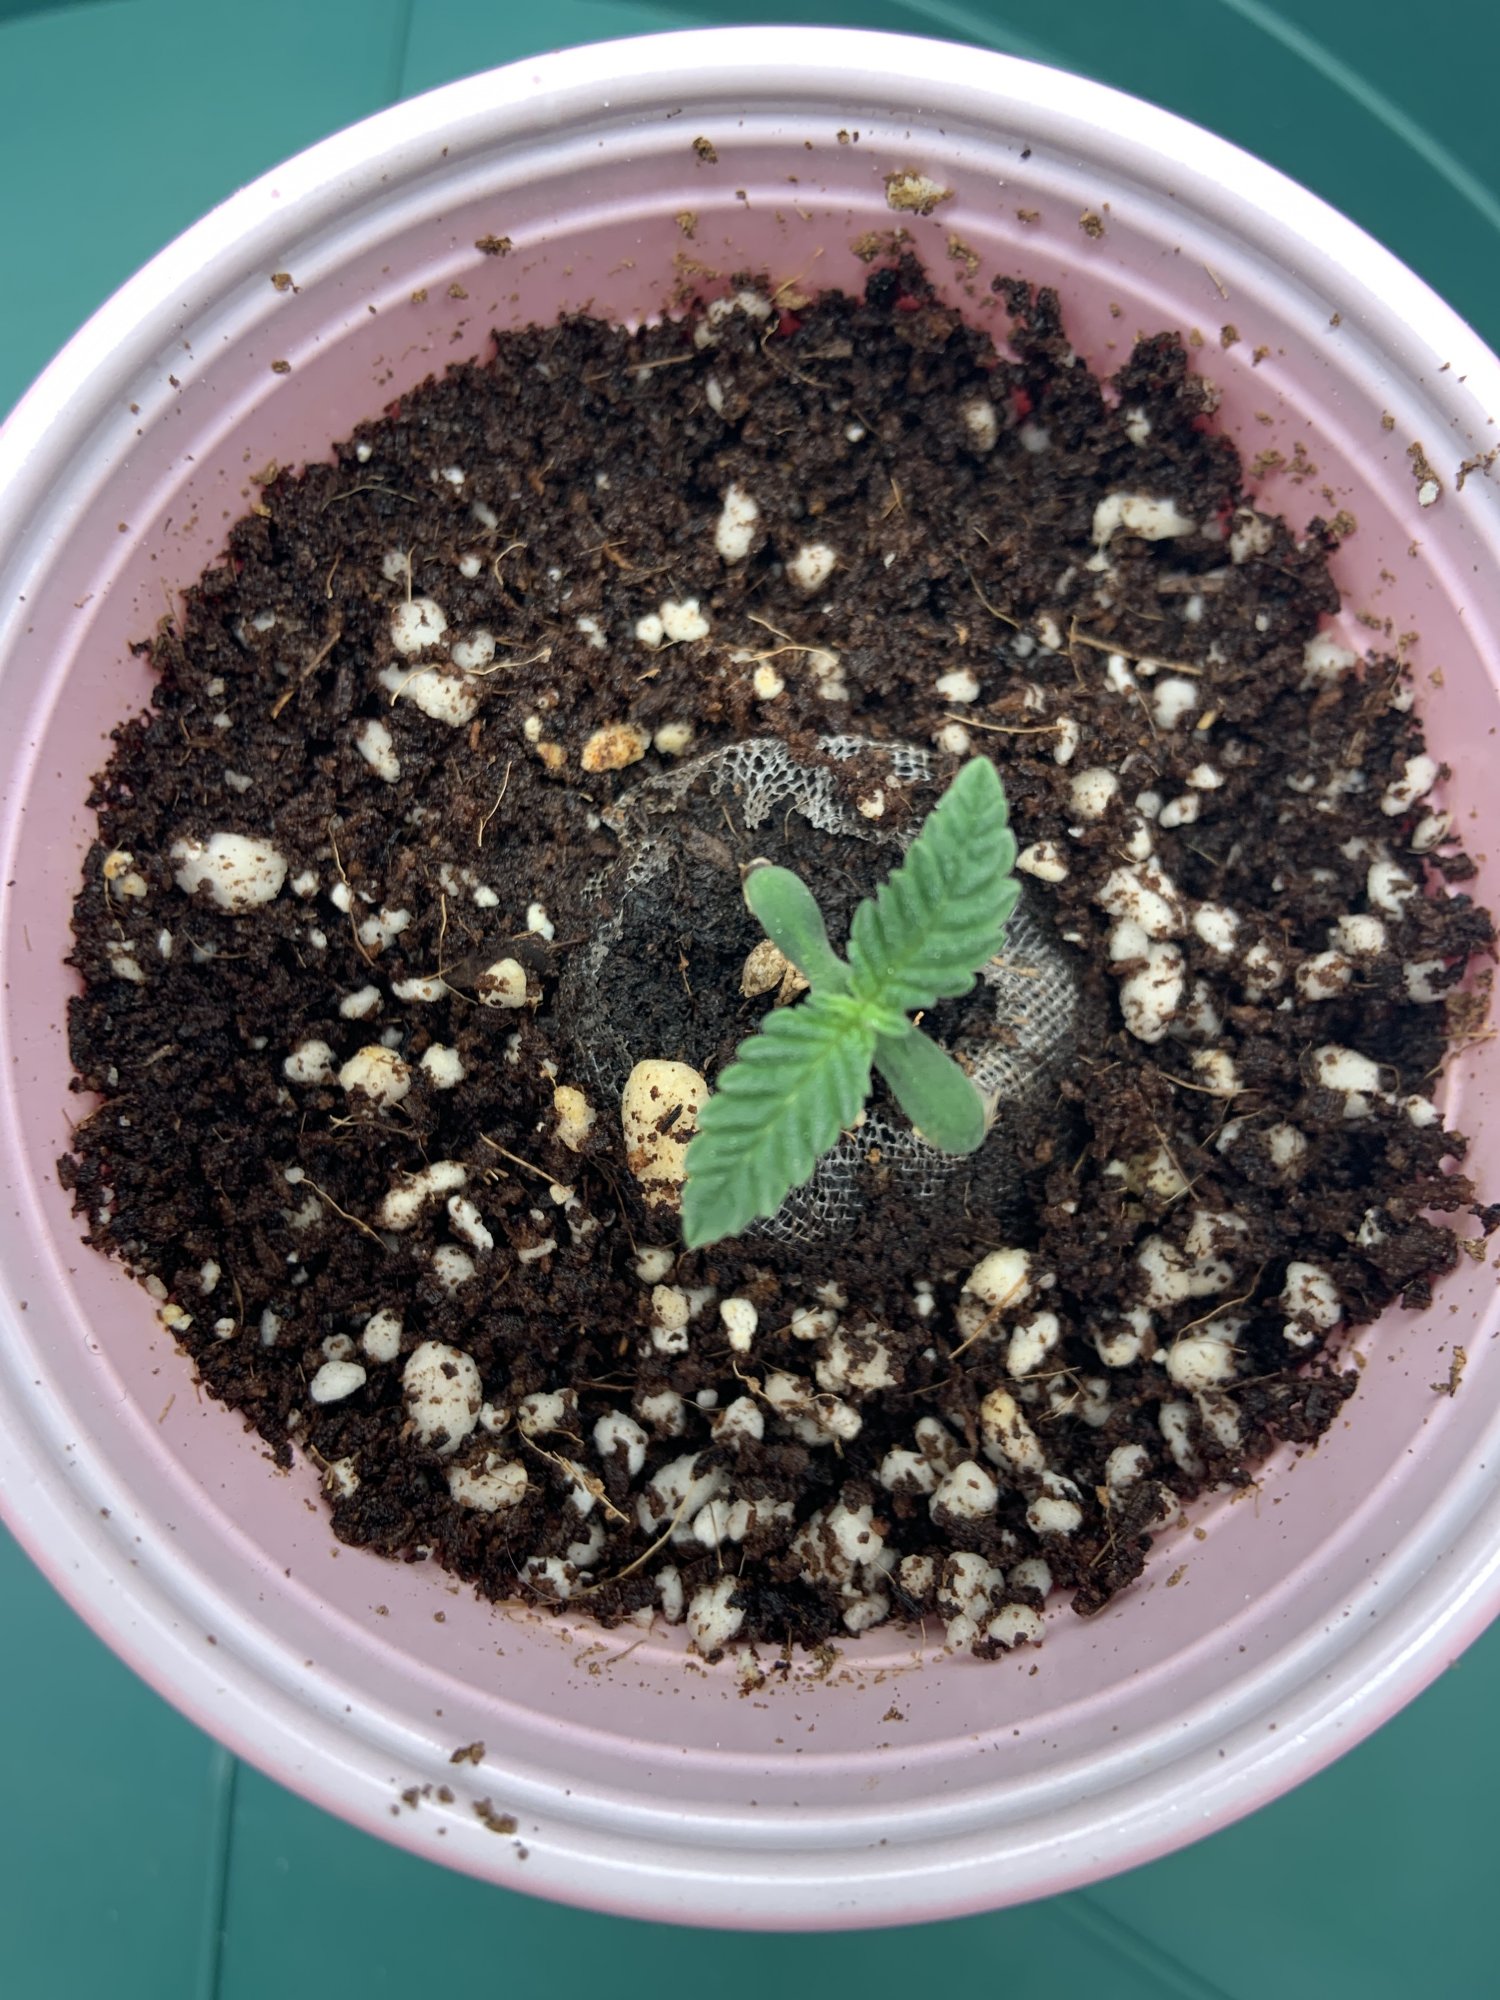 My second grow coco 2